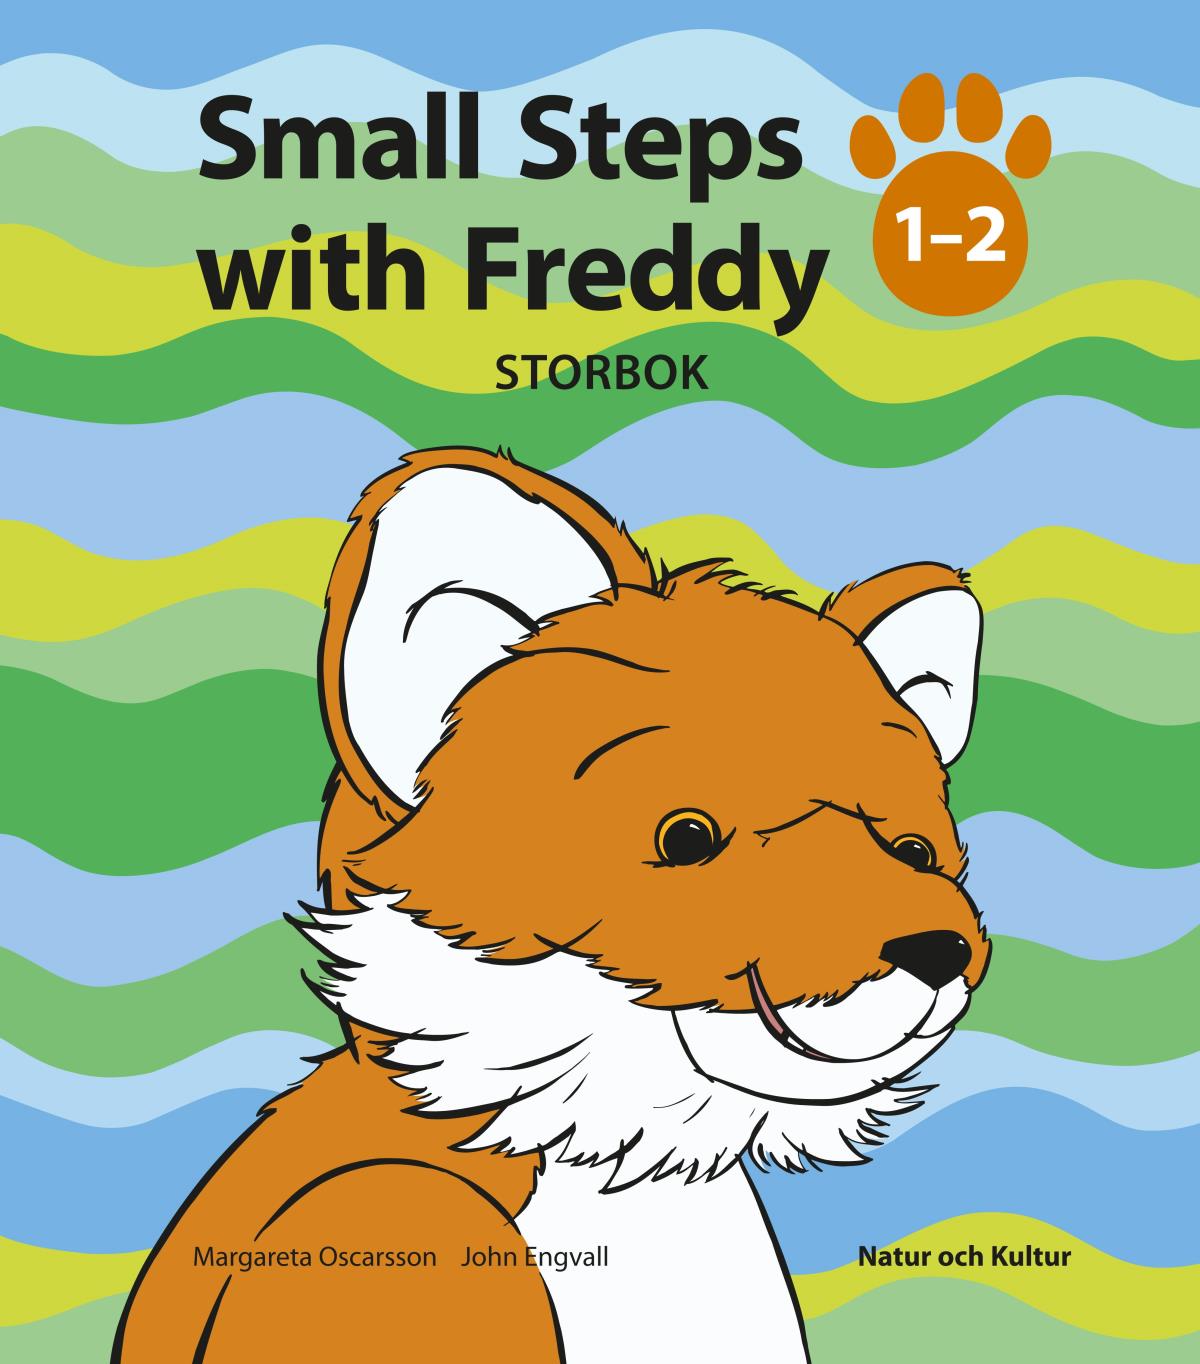 Small Steps With Freddy. 1-2, Storbok